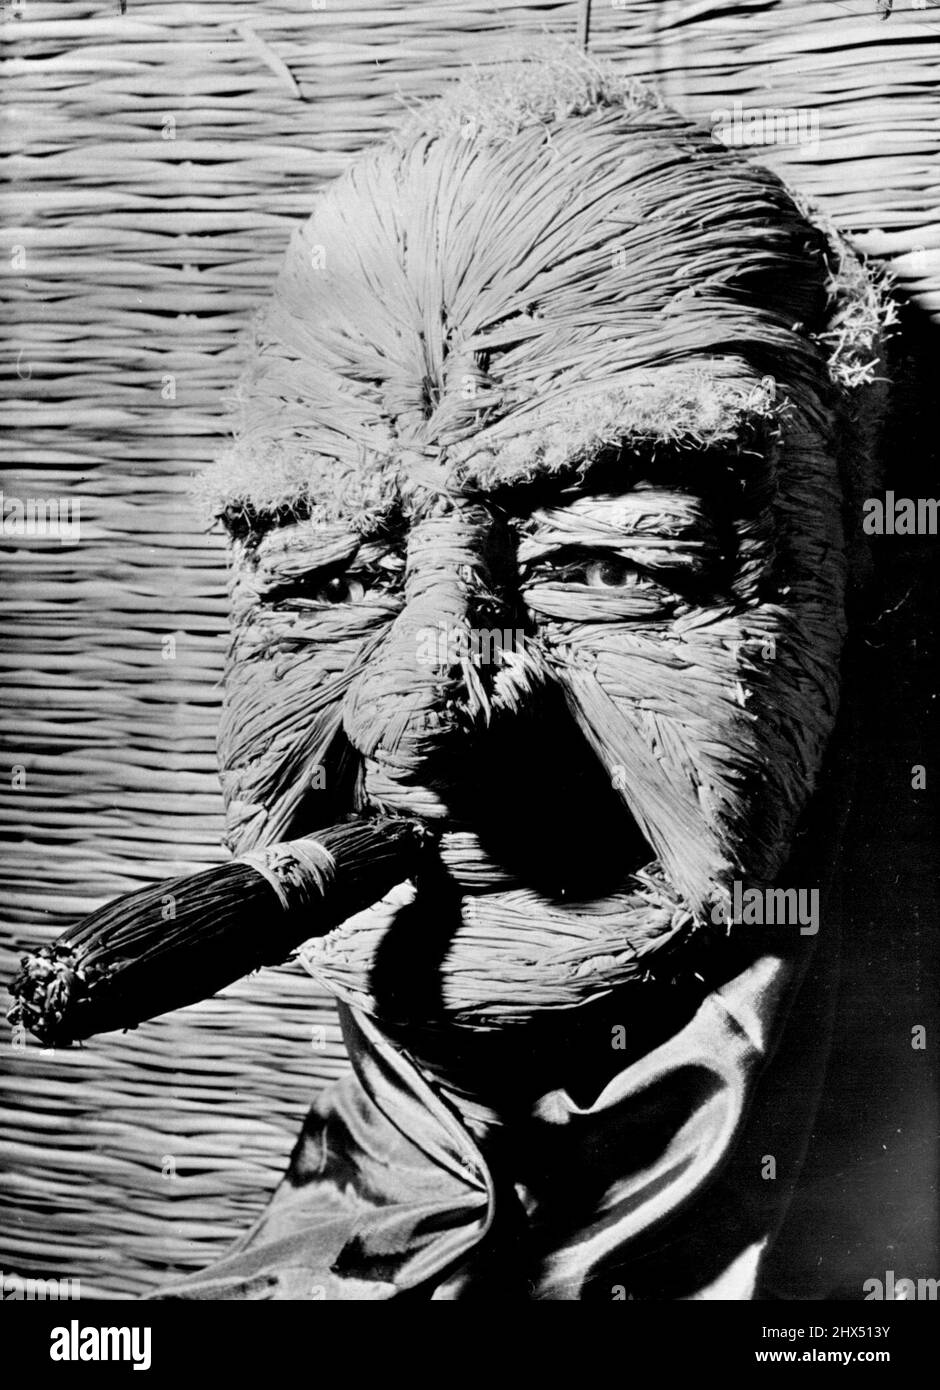 Sculpture in Straw -- Mr. Churchill though he could hardly be called a man of straw. The Italian sculptor V.N. Luri has developed a new medium. The World's personalities find themselves executed in straw. March 12, 1953. (Photo by Paul Popper). Stock Photo